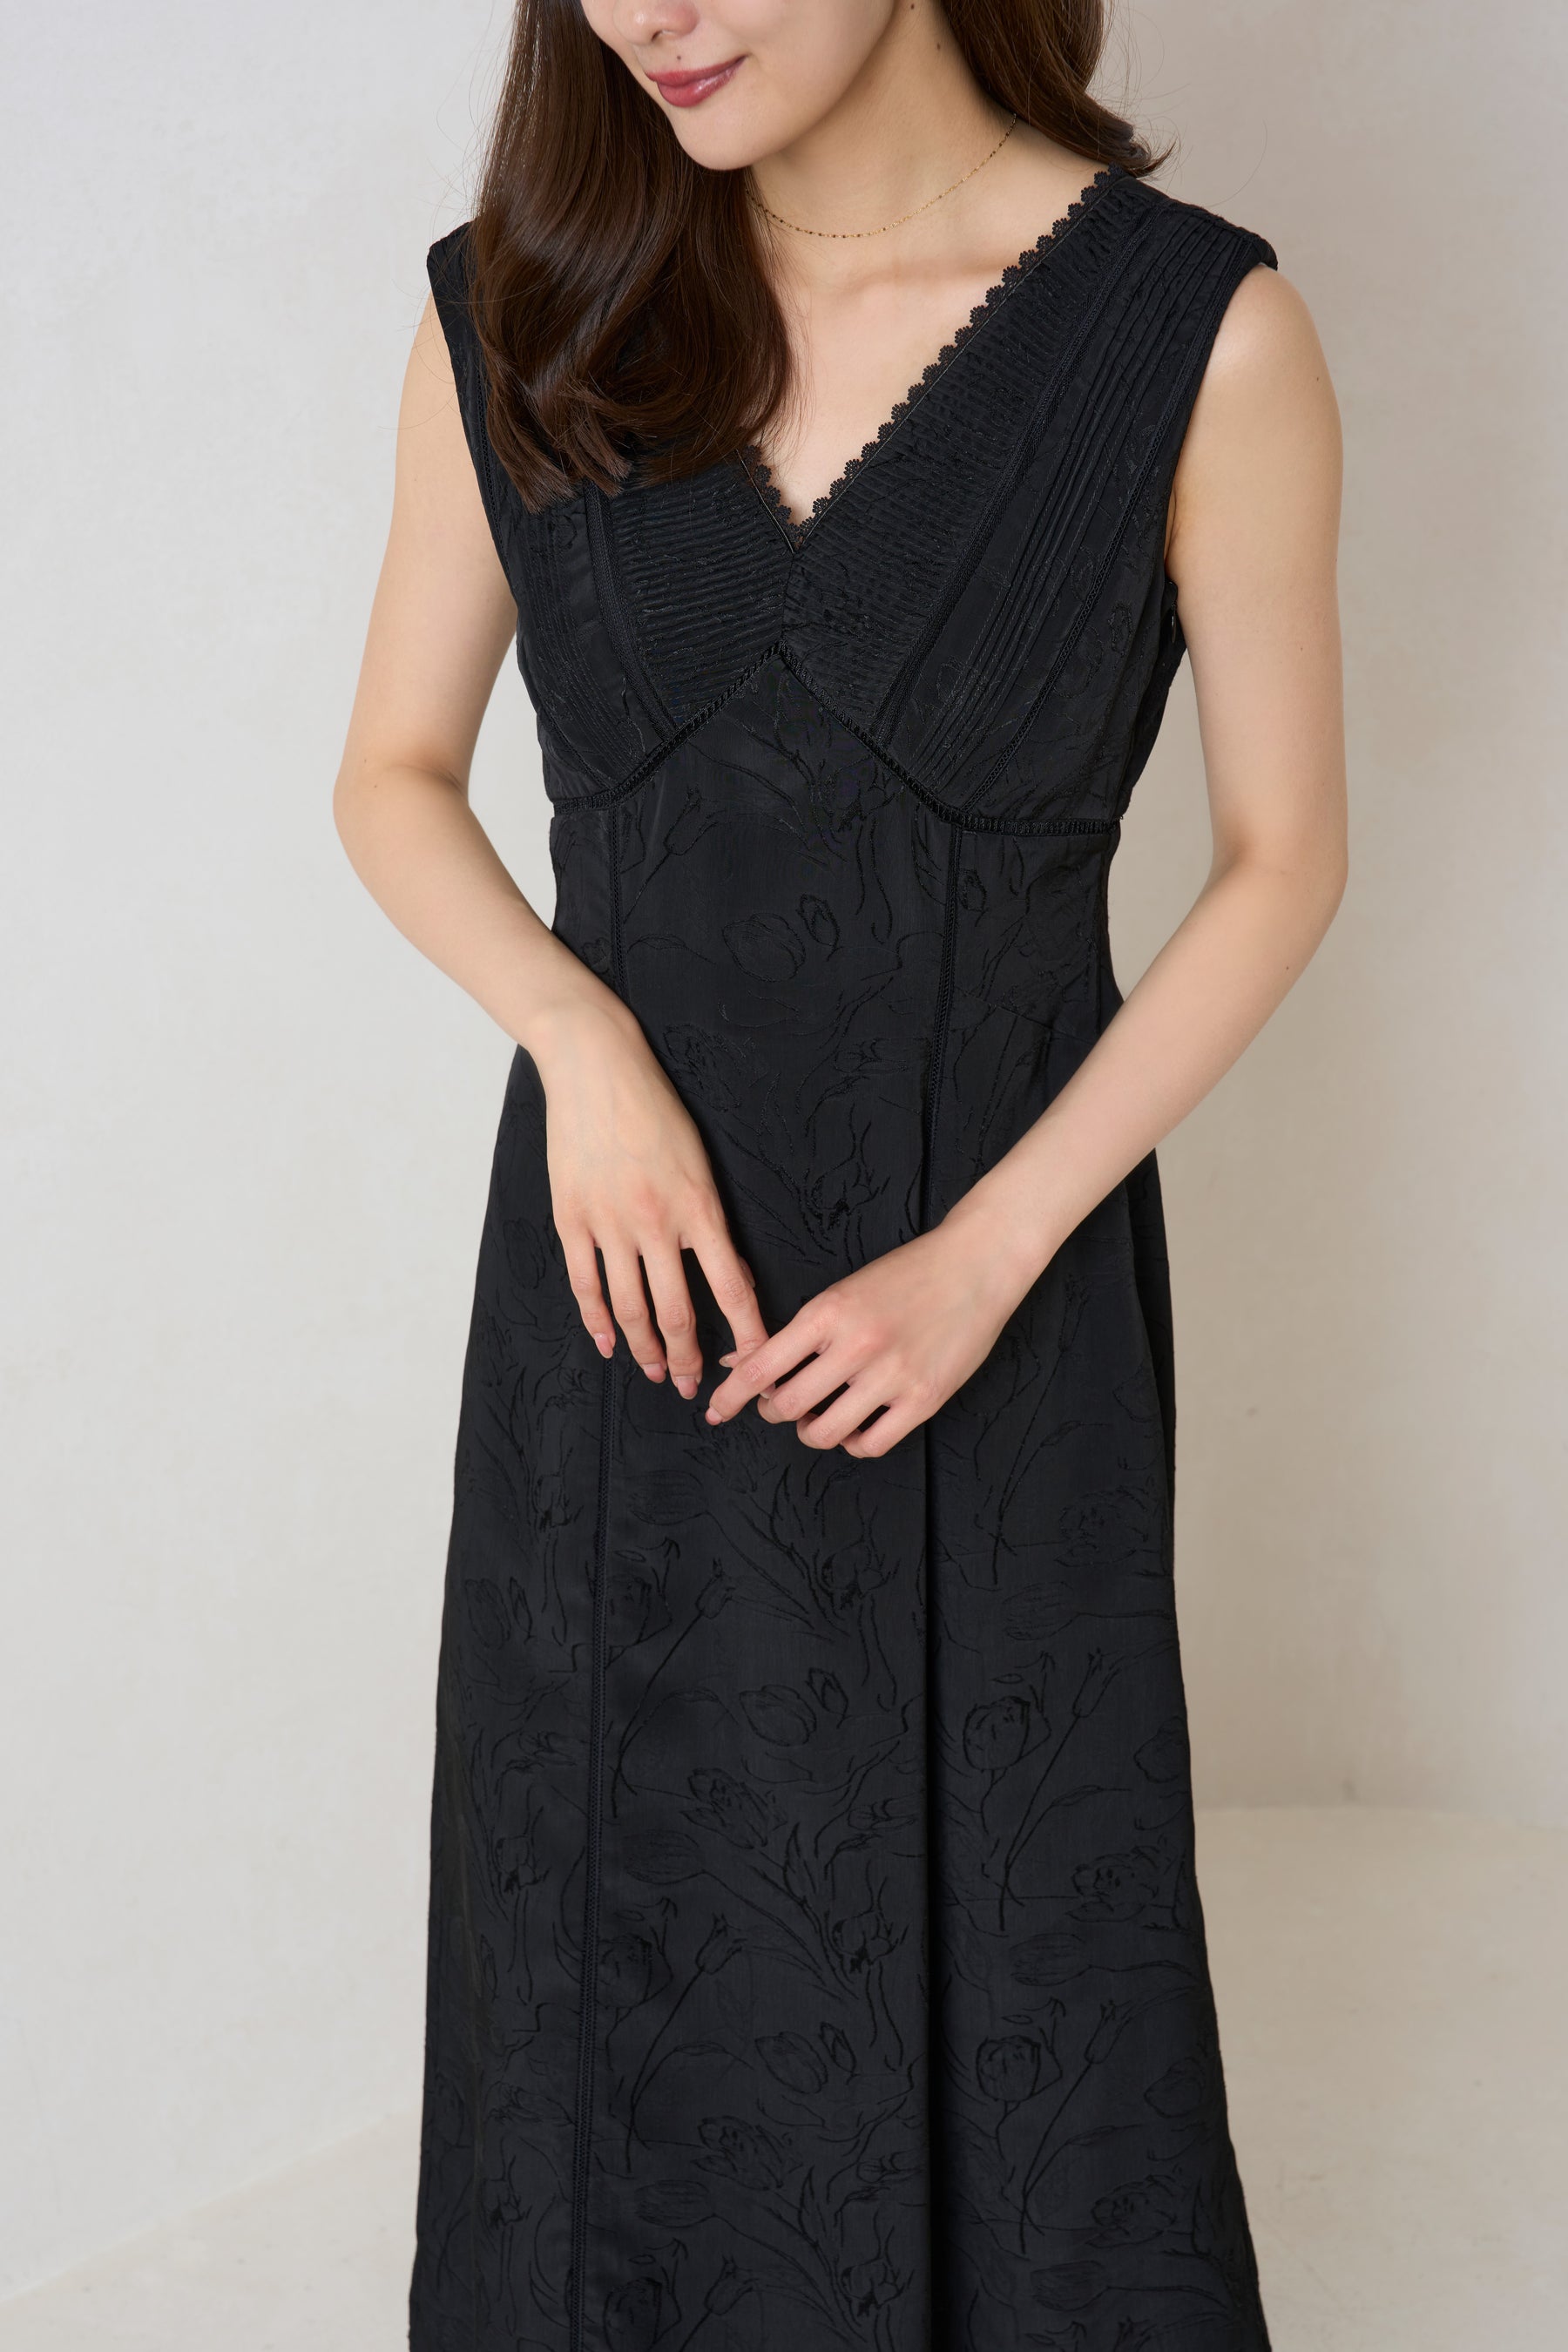 [Shipping in mid-July] Lace Trimmed Jacquard Dress